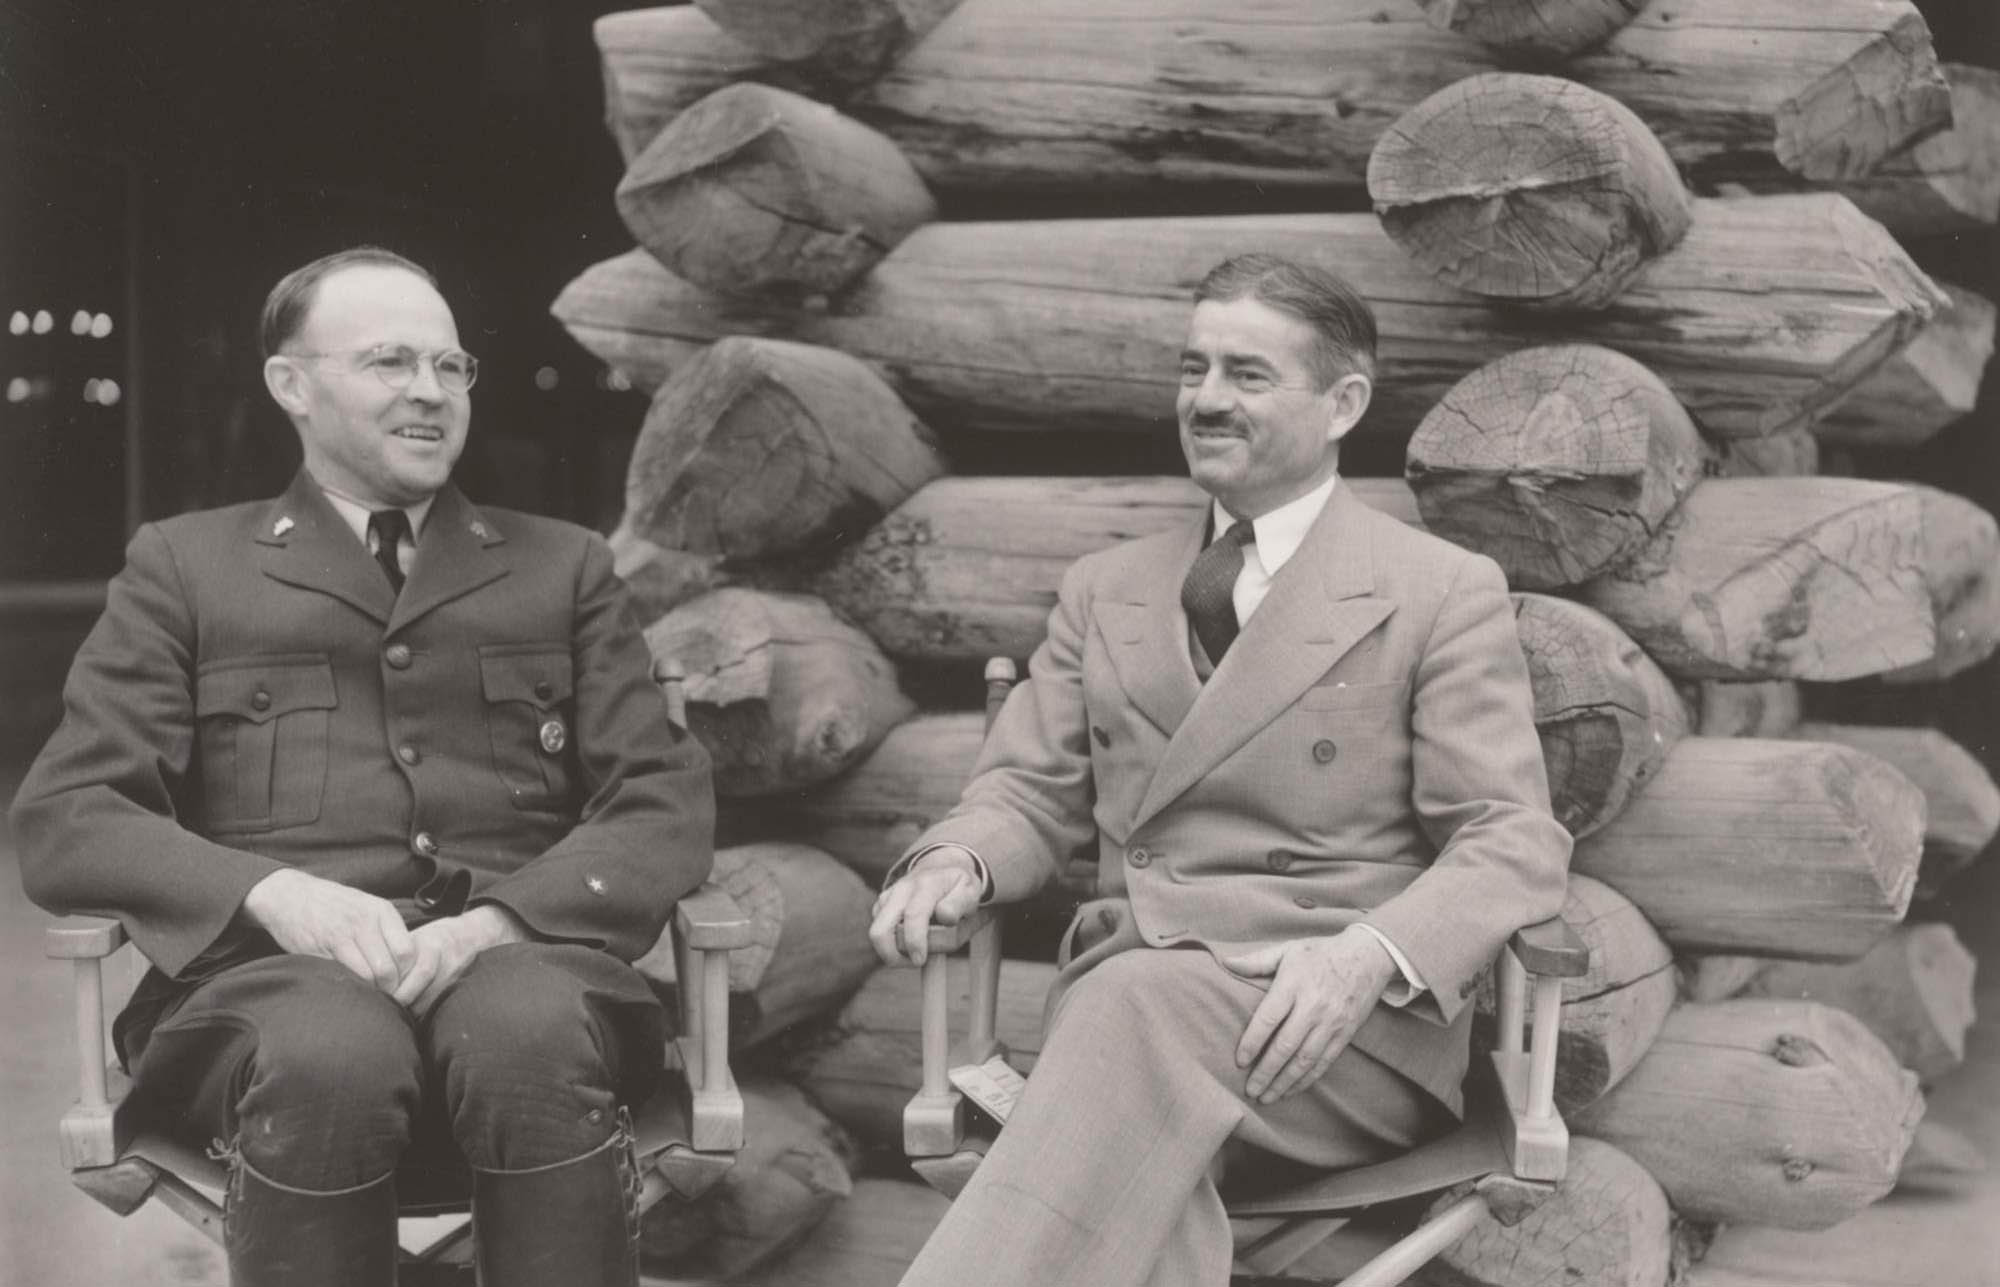 Edmund Rogers and Newton Drury sit in front of a stack of logs. Rogers wears the NPS uniform with a round badge. Drury wears a suit.